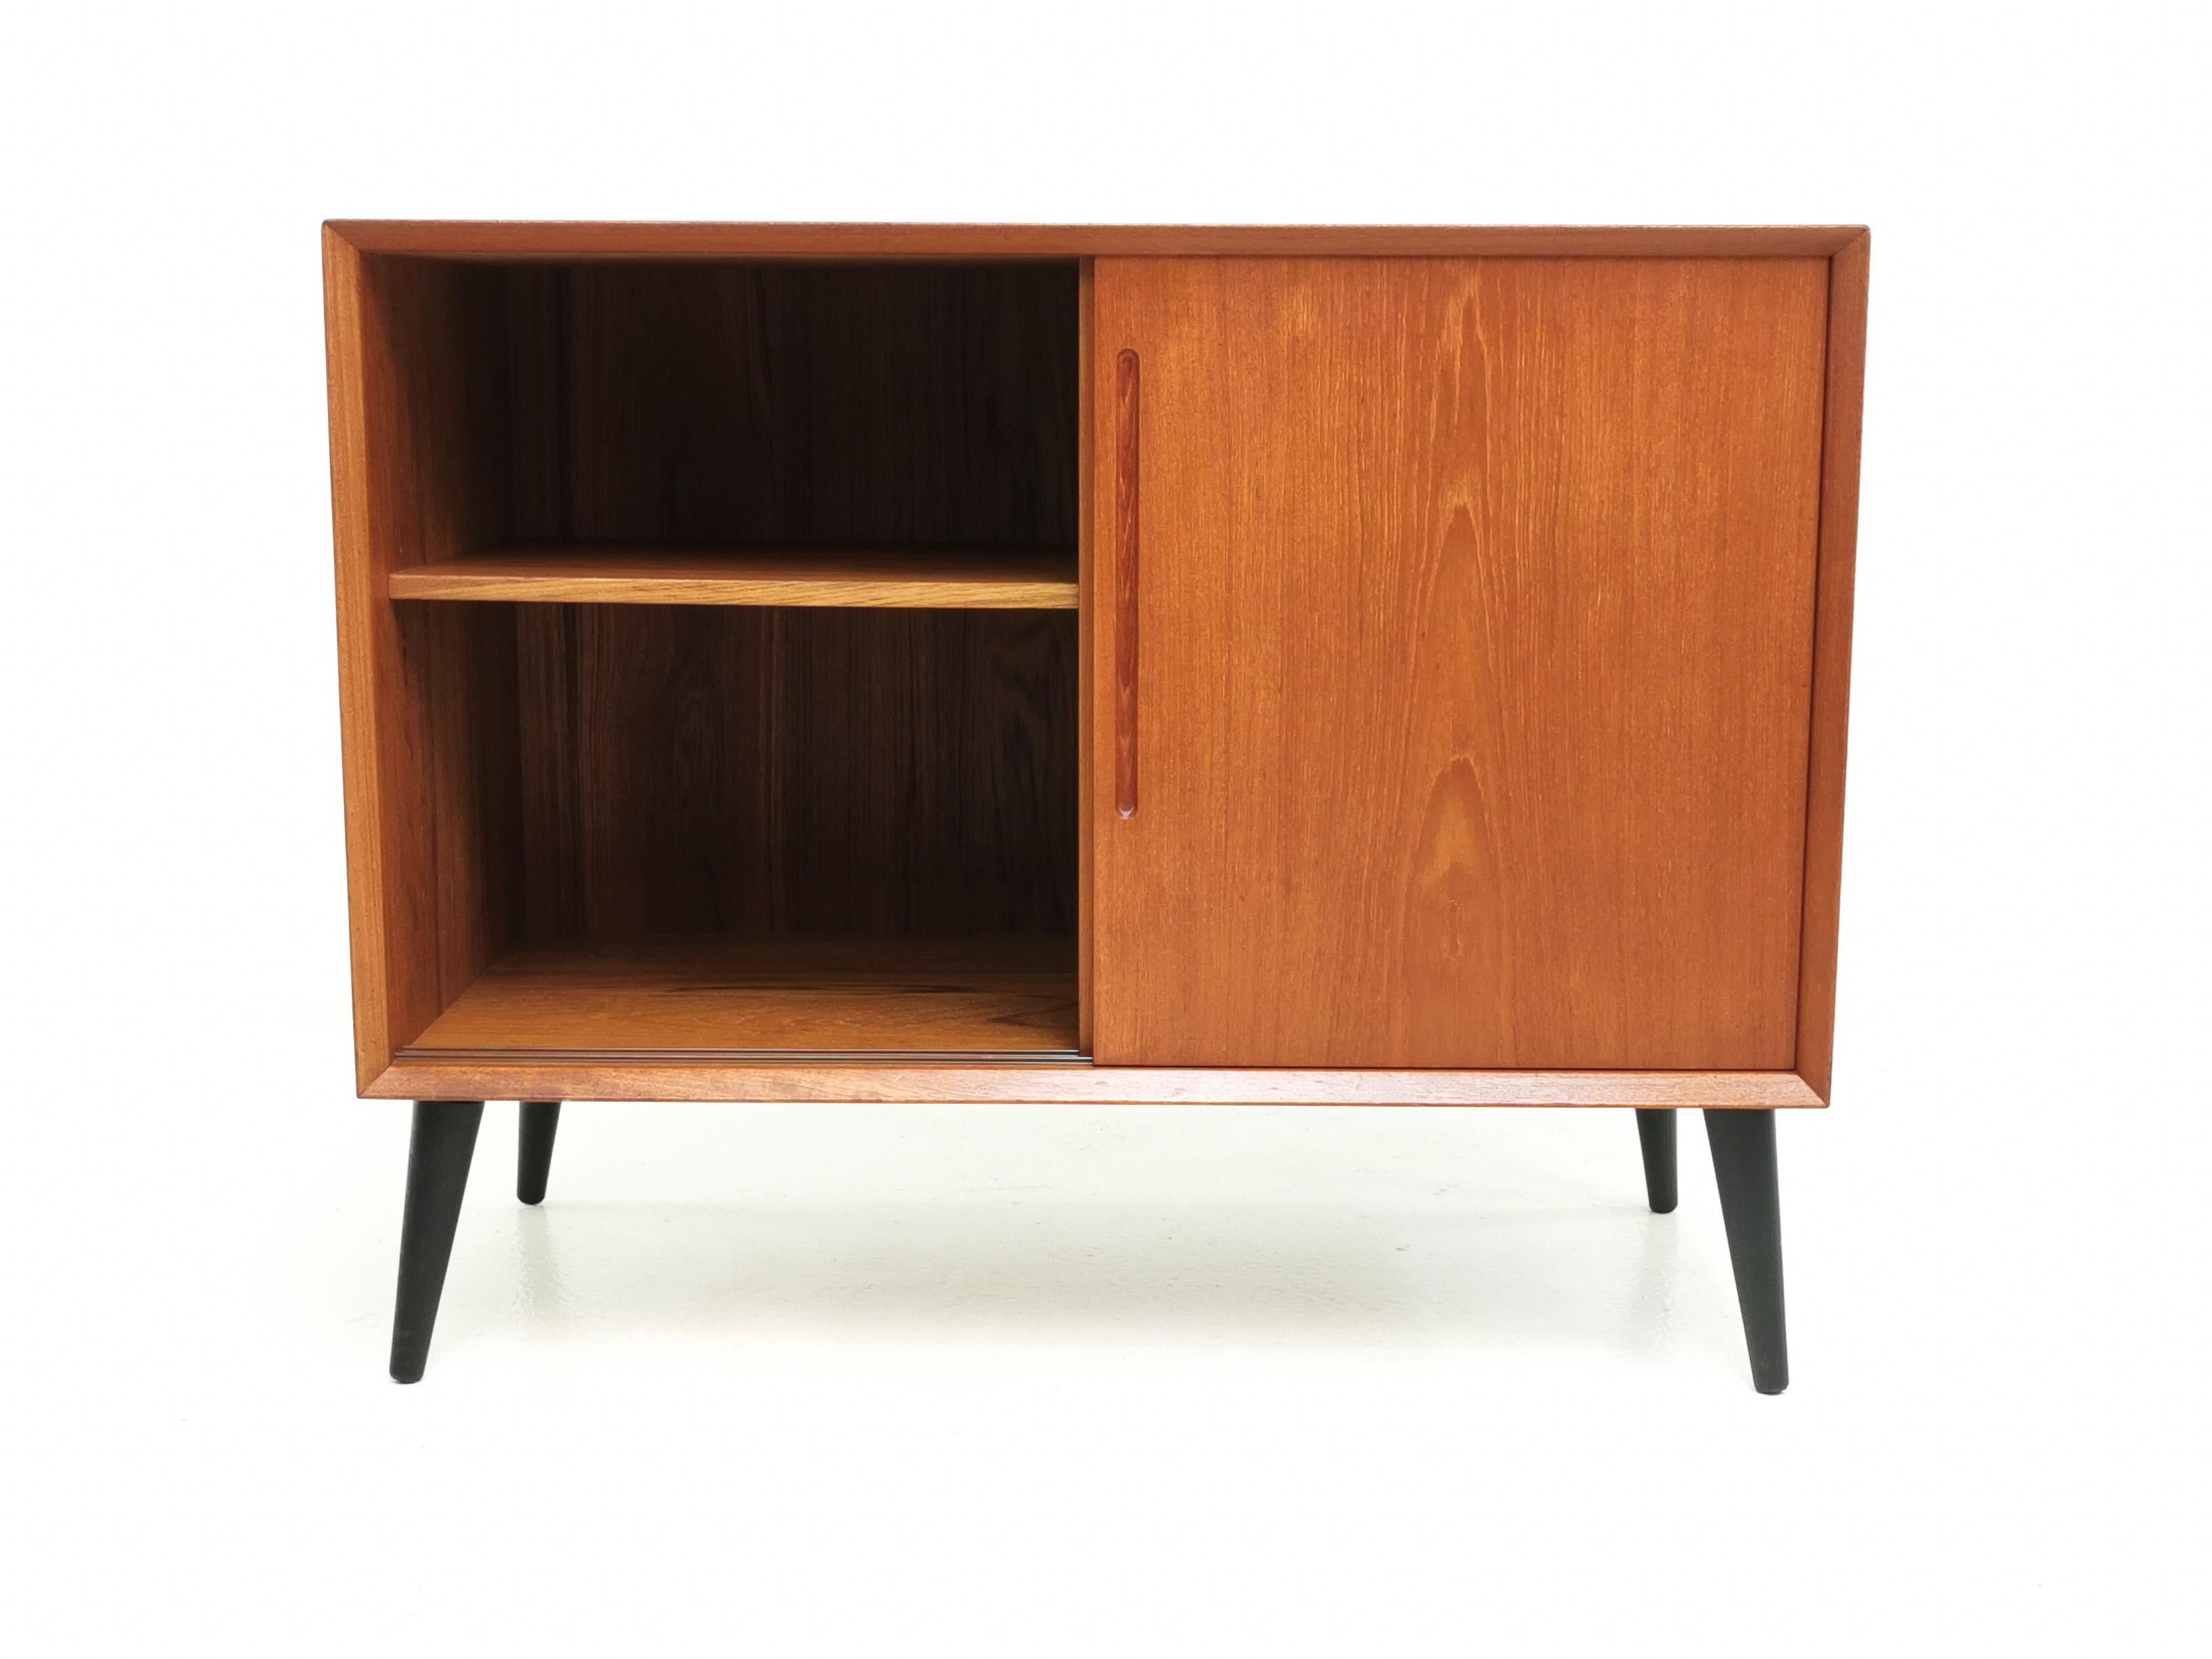 Danish sideboard cabinet

High-quality made Danish teak sideboard cabinet from the 1970s.

A compact sideboard with features two sliding doors with recessed door handles and a internal shelf.

We have raised the unit on solid timber Ebonised